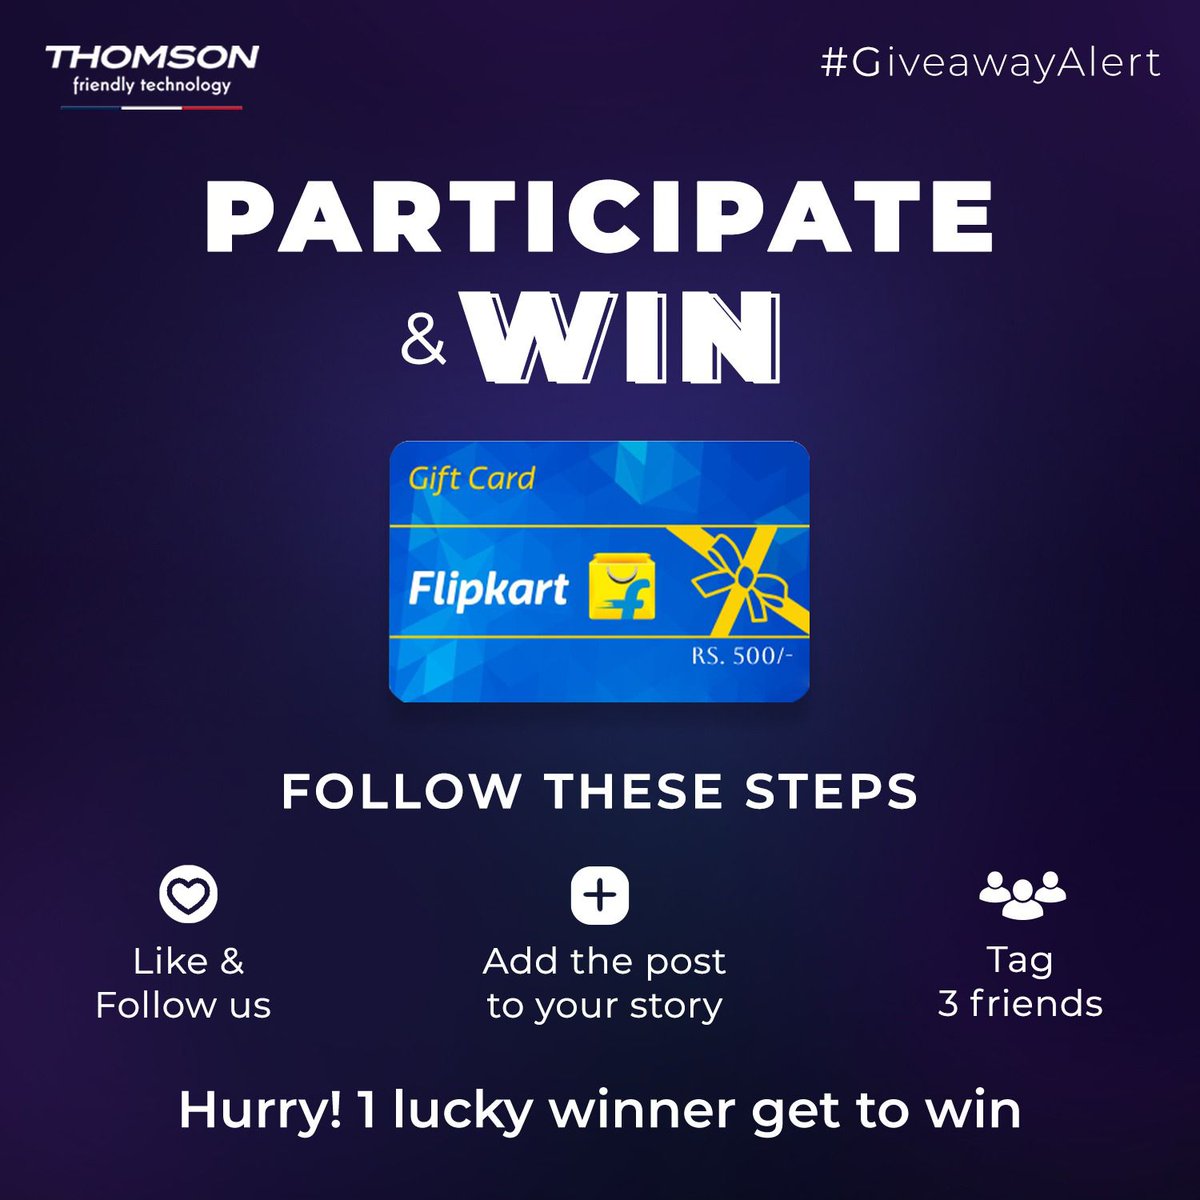 Contest Alert! Add this post to your story and and get a chance to win! #Thomson #ThomsonHome #Participate #Win #Like #Follow #Lucky #GiveAwayAlert